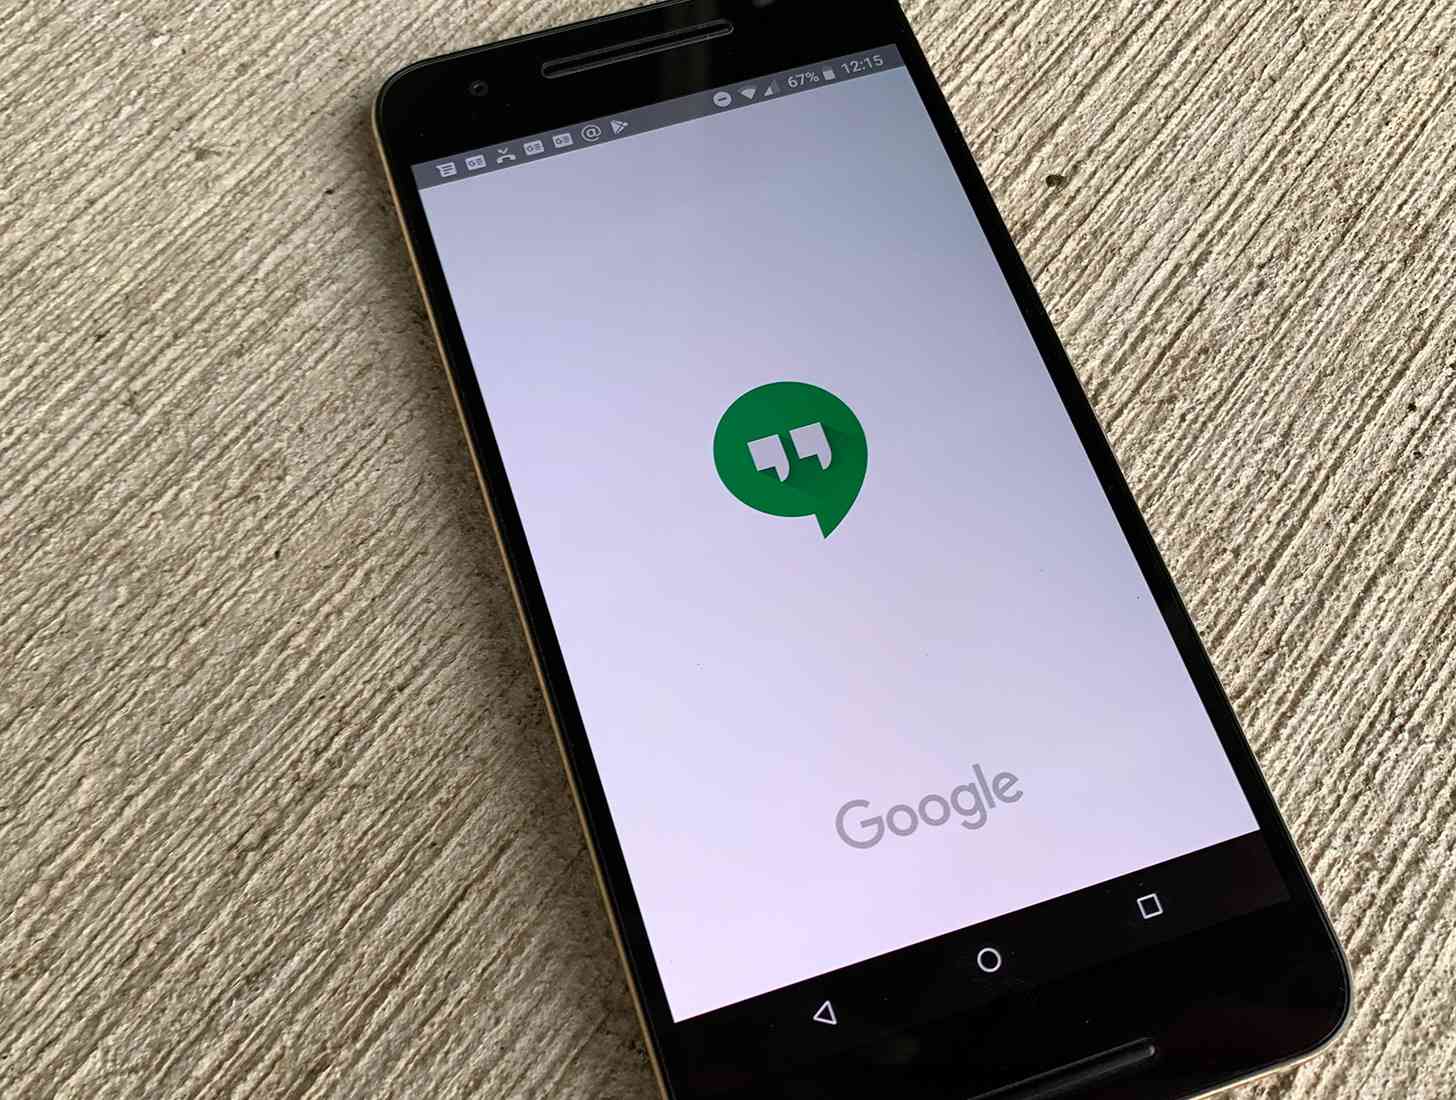 Google Hangouts Android app